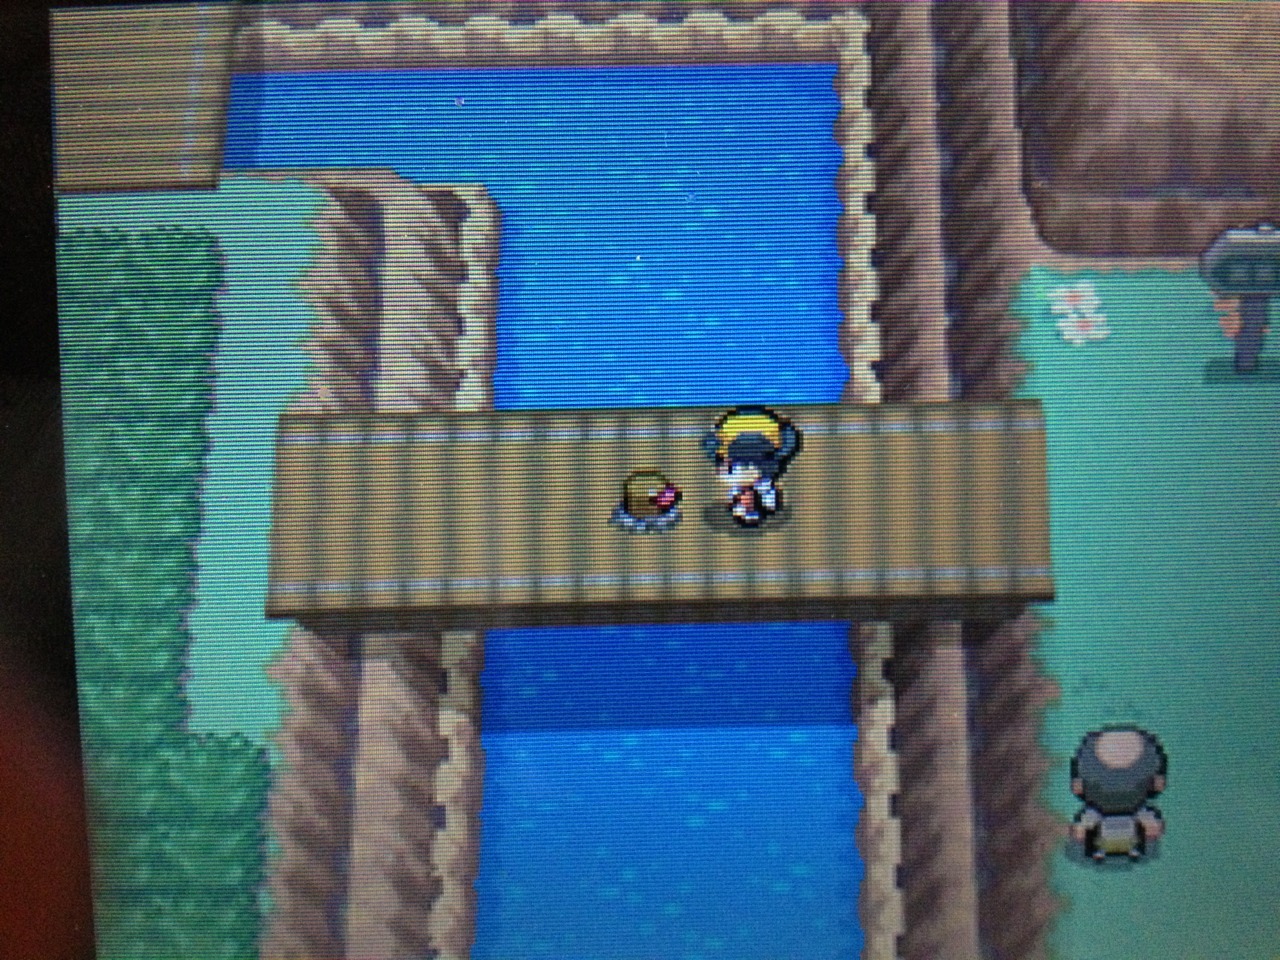 A diglett has somehow tunneled up into a bridge in HGSS.